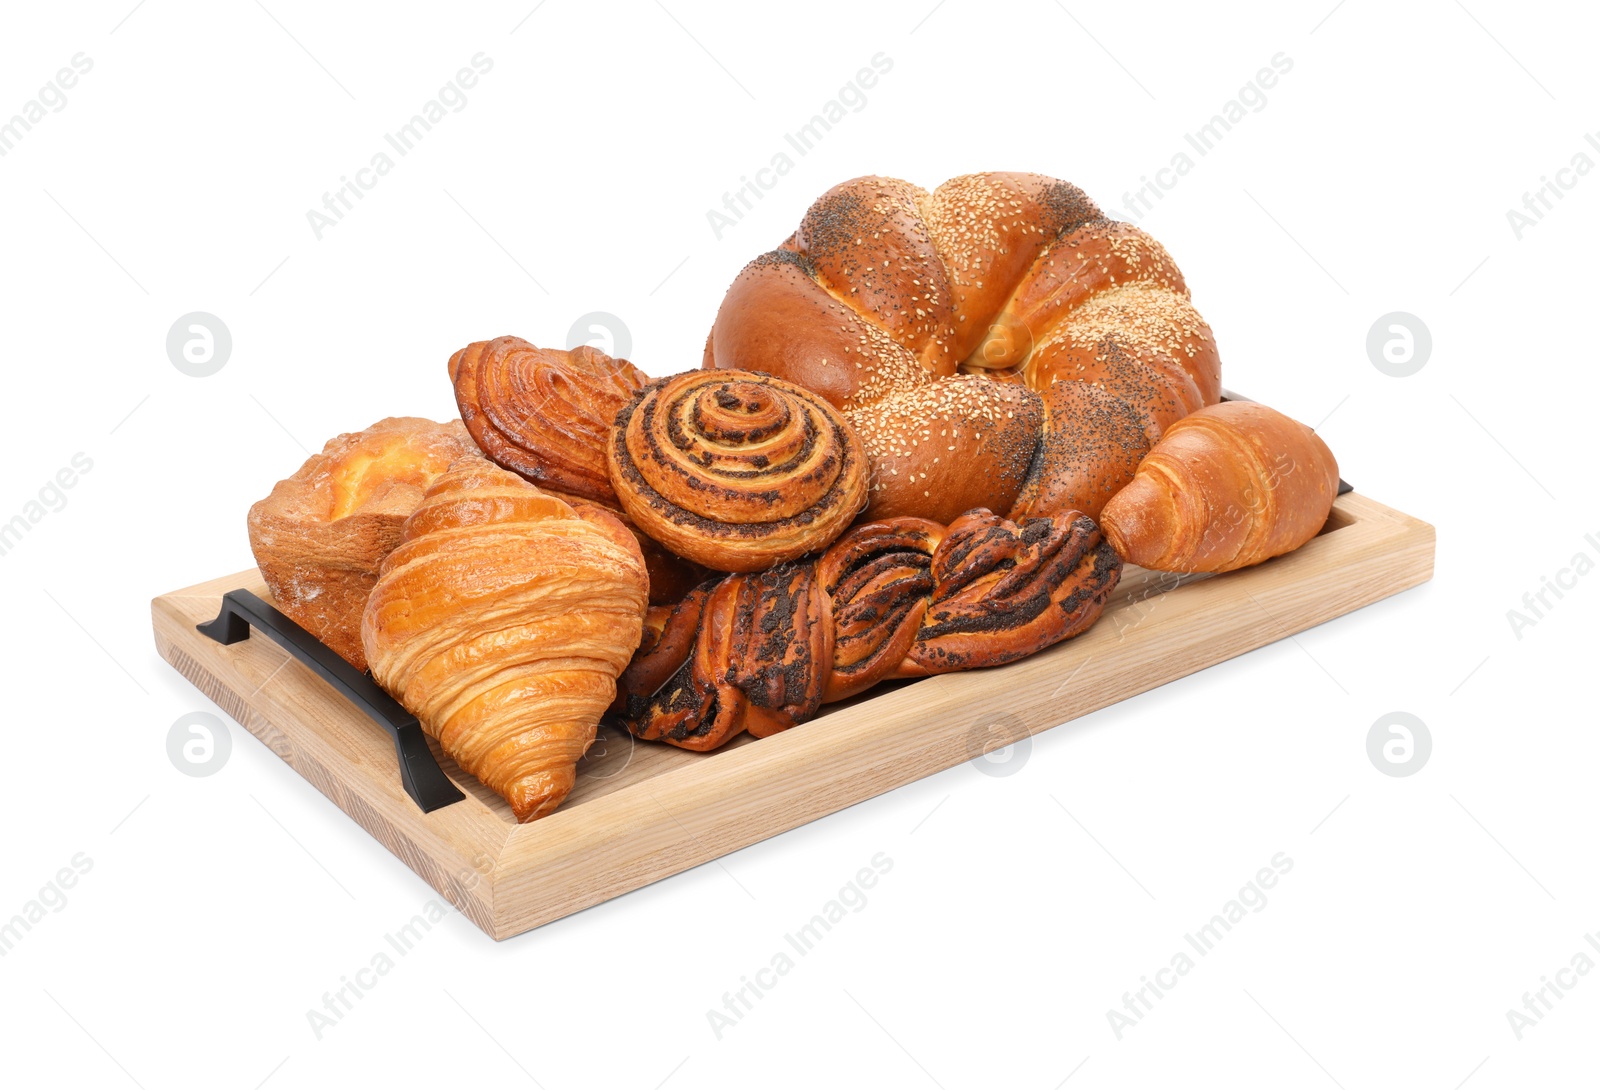 Photo of Wooden tray with different pastries isolated on white